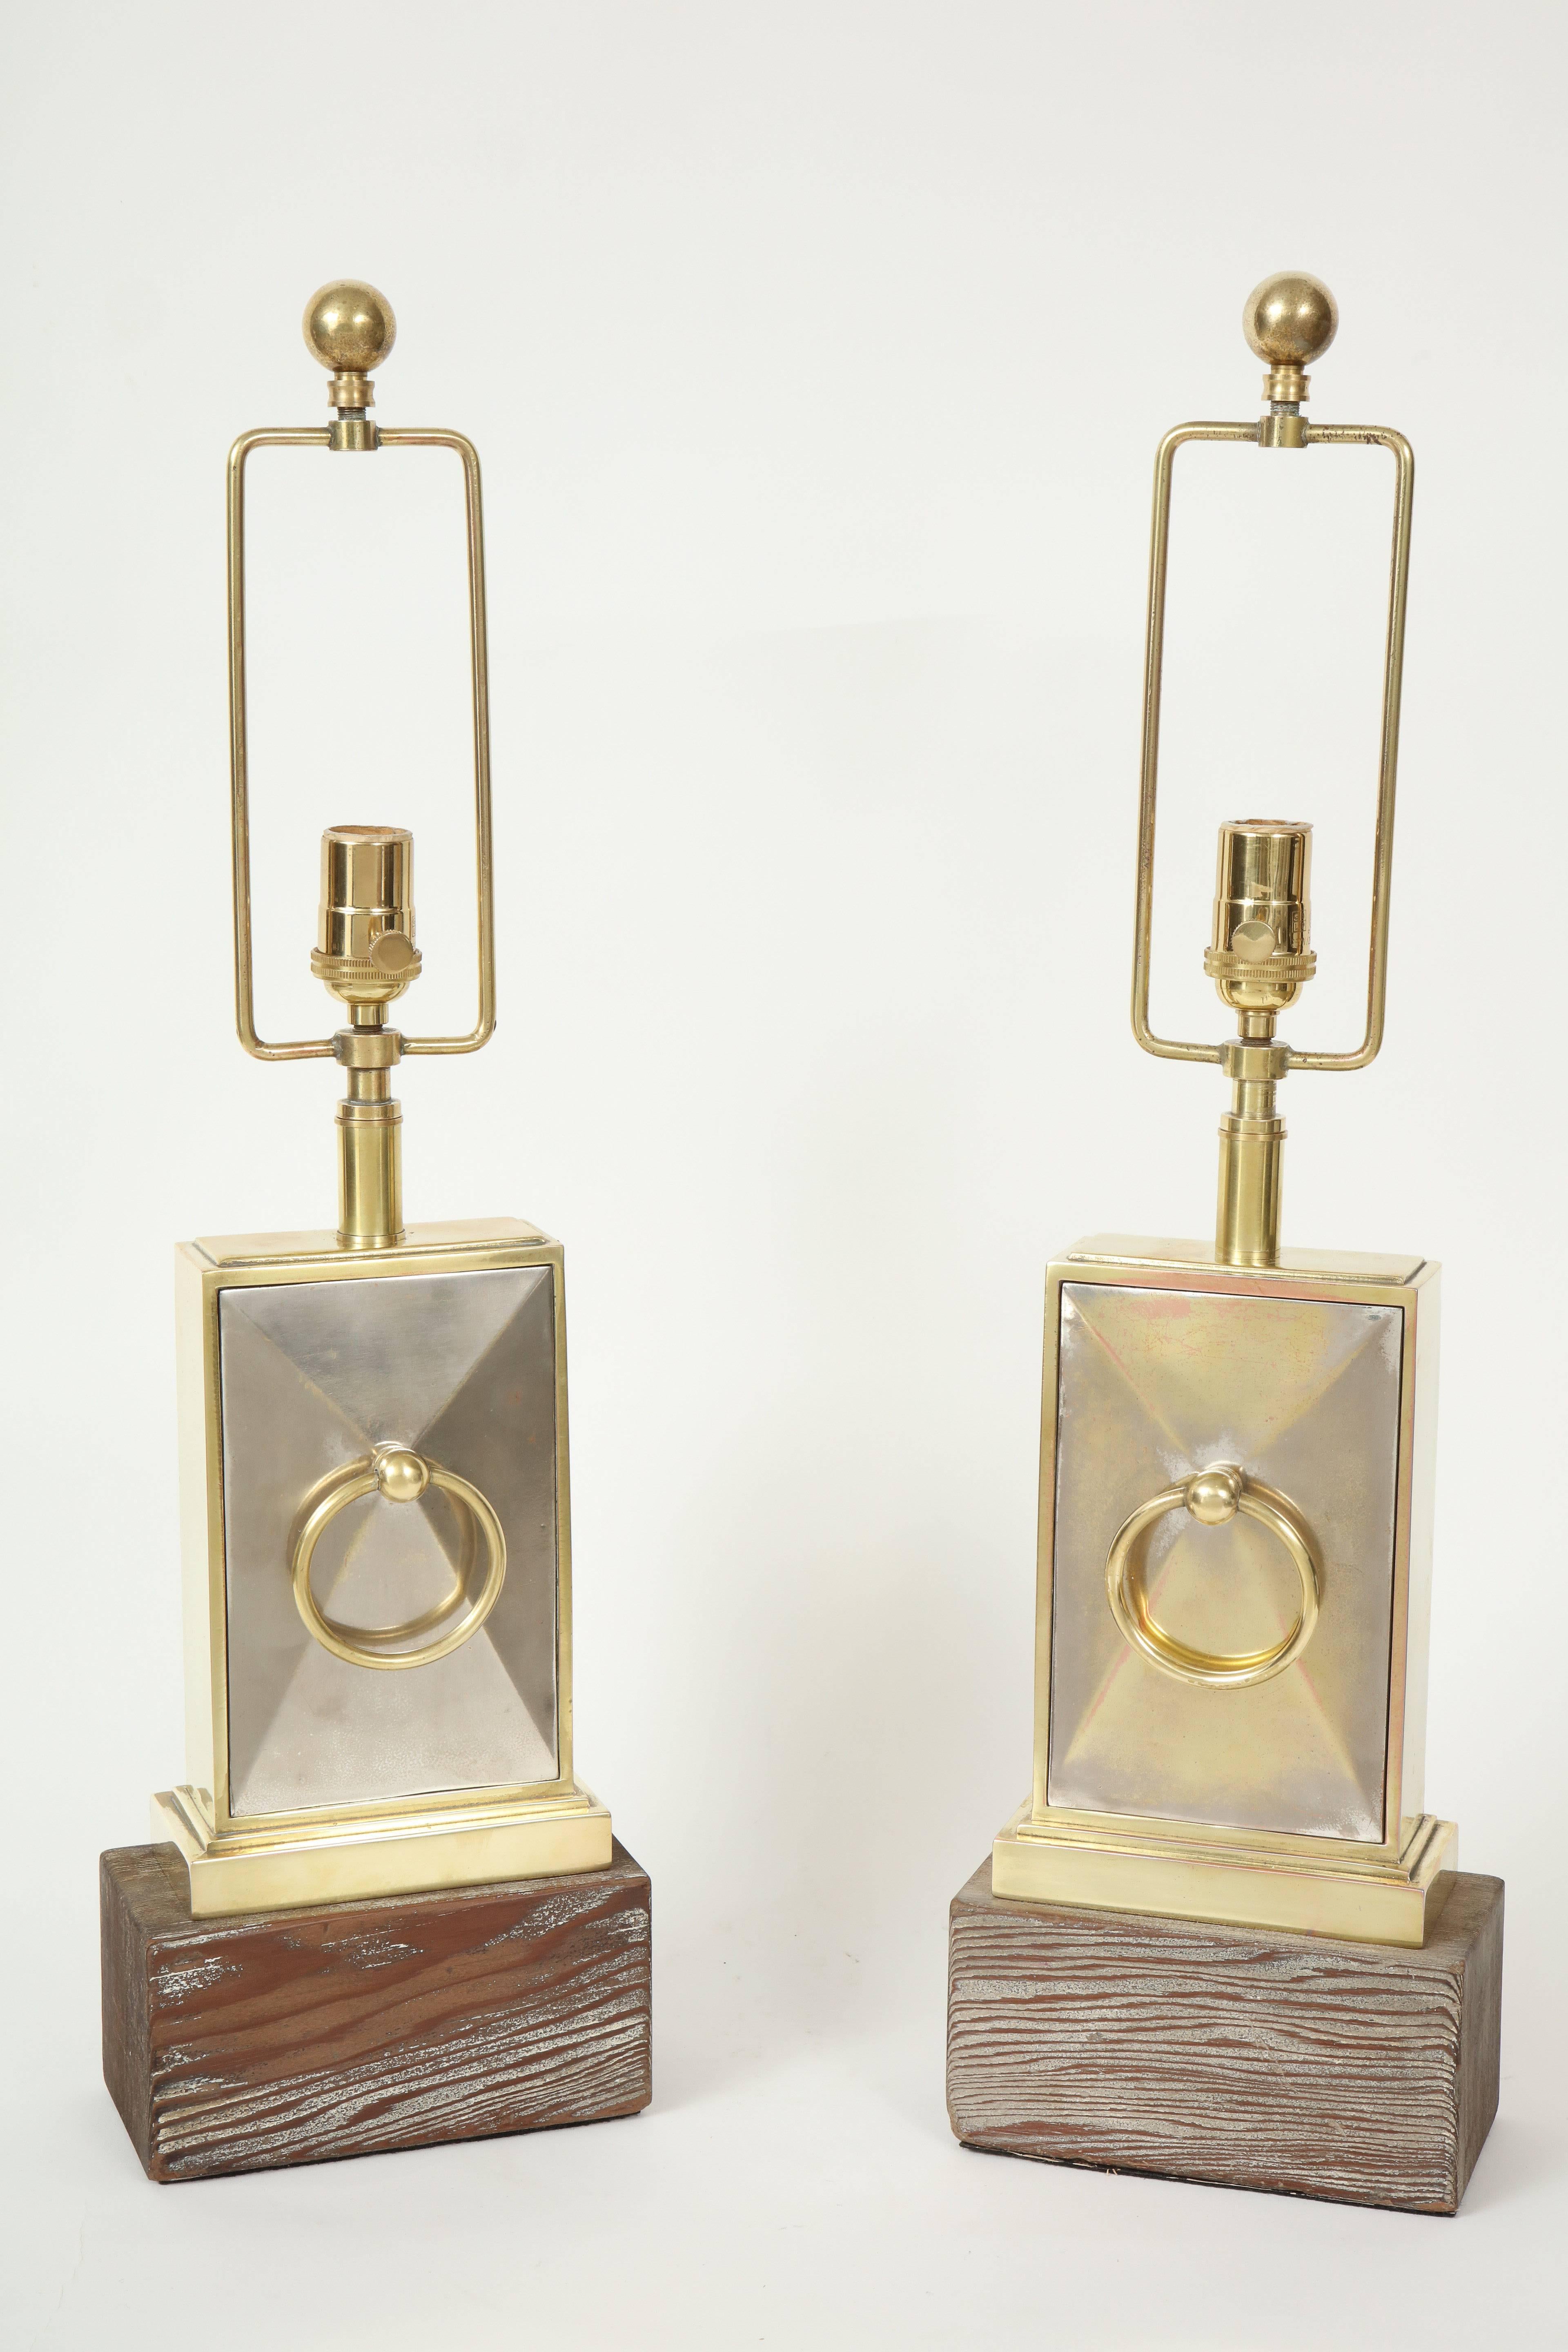 Pair of lamps by James Mont.
The faceted nickel lamp bodies are framed in brass with ornamental ring.
They sit up on wooden bases which have a pickled oak finish and are newly rewired for the US.
The height to the top of the lamp body is 13